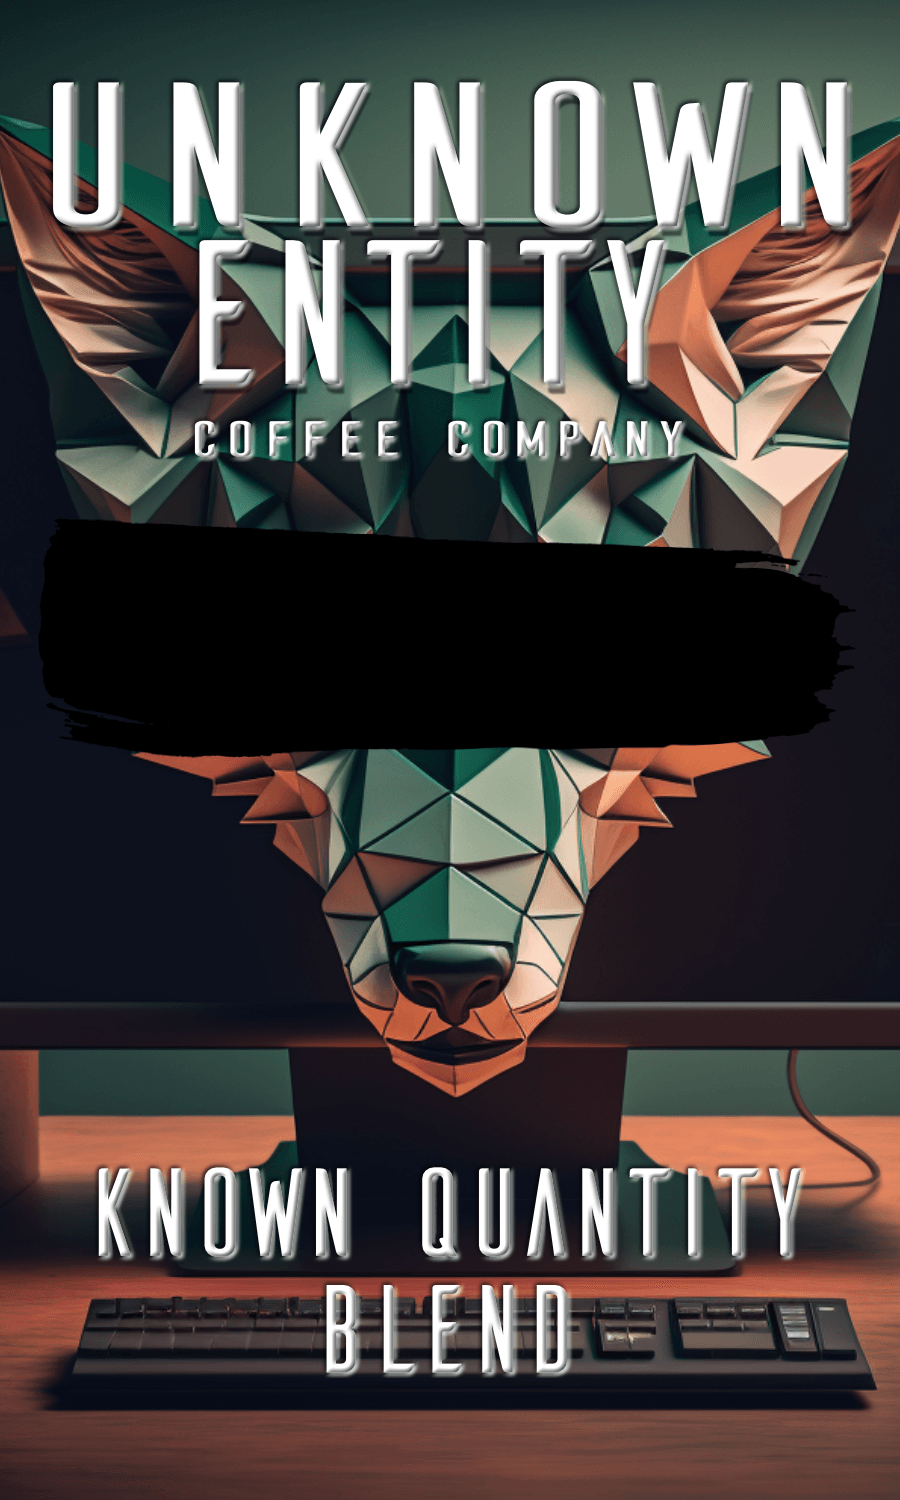 Known Quantity Blend-Unknown Entity Coffee-New,roasted coffee,subscription,whole bean